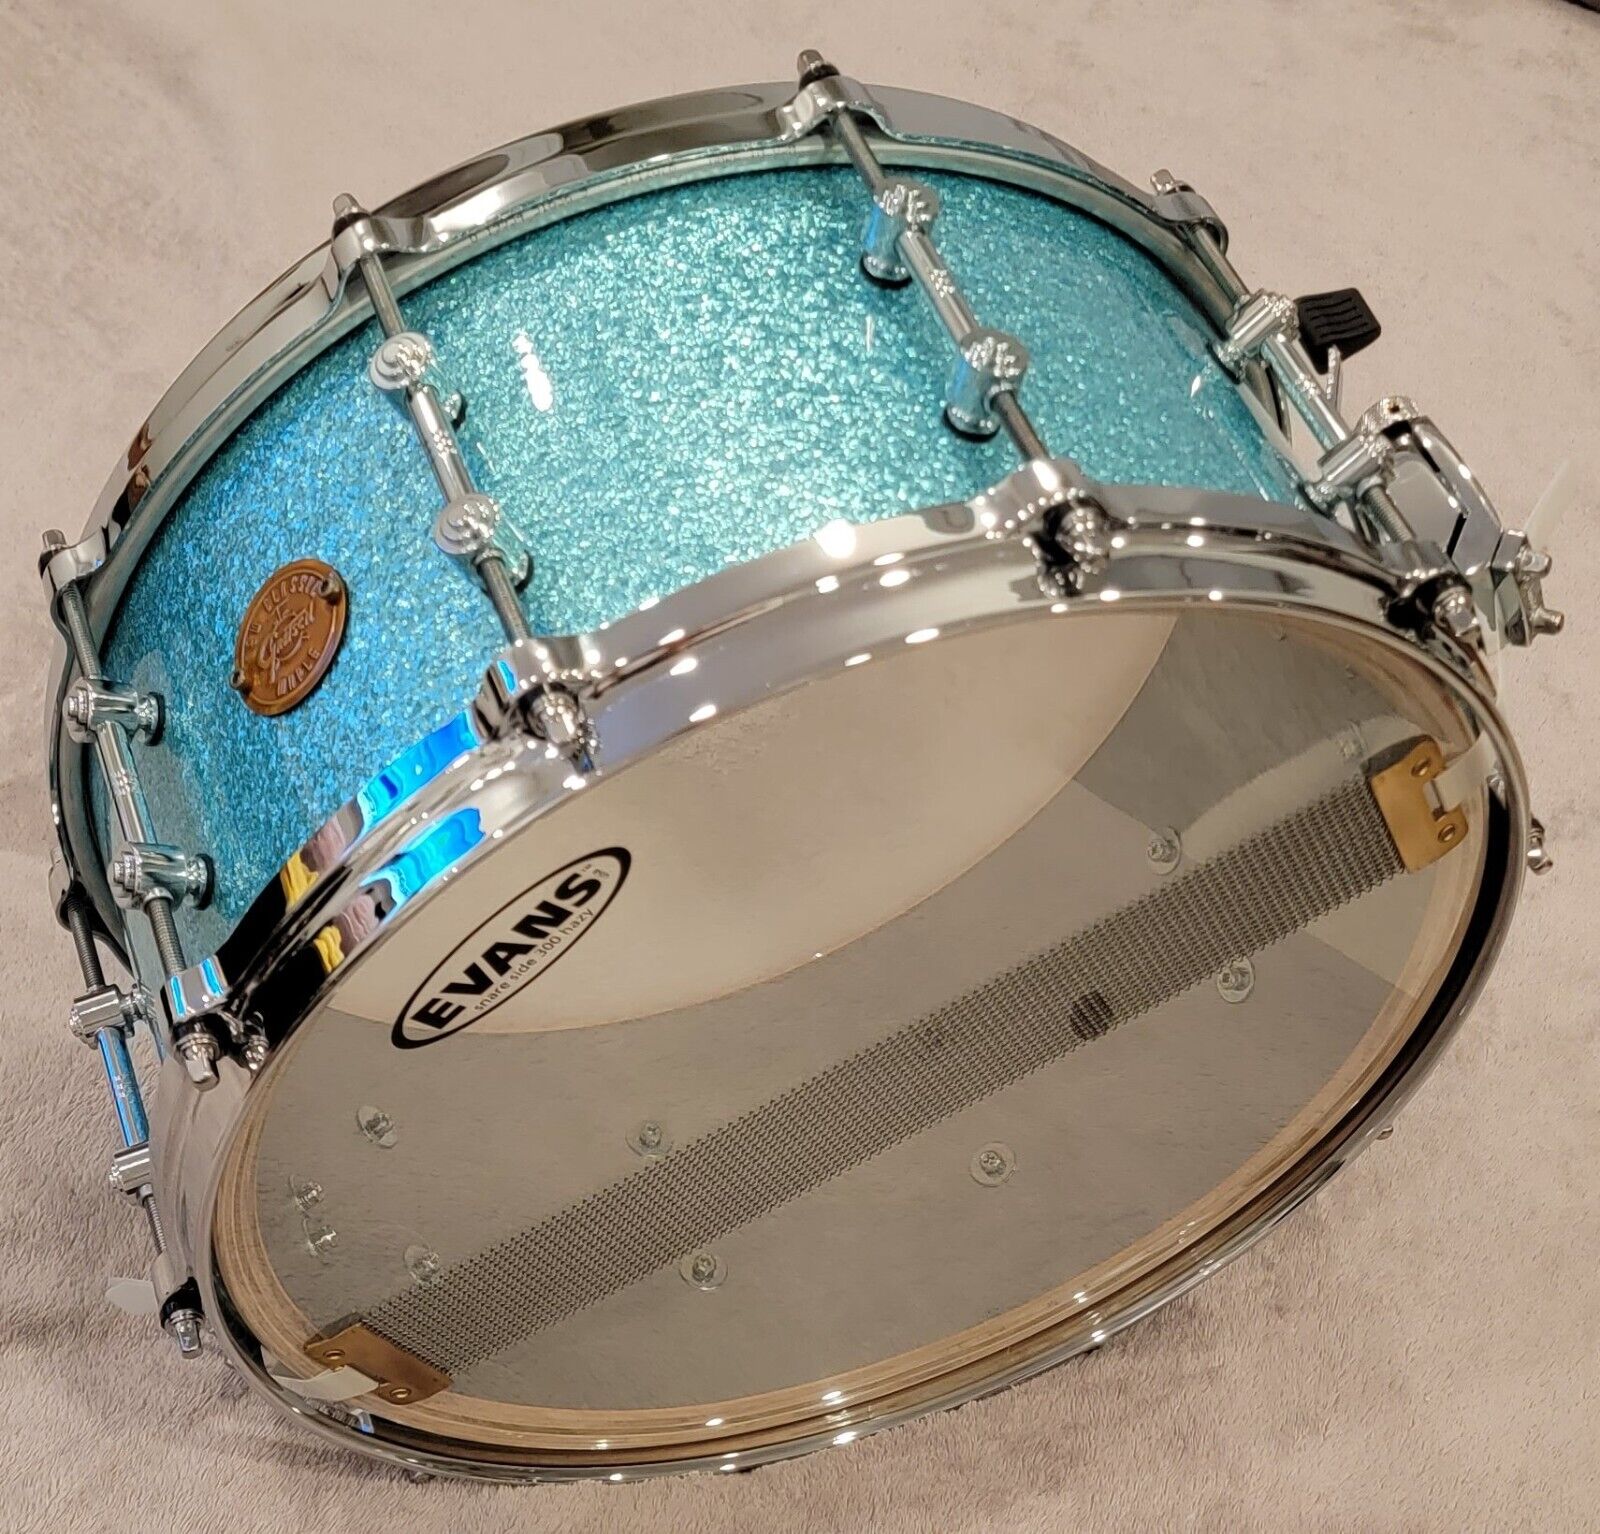 Gretsch New Classic Maple 2012 Limited Reserve 4pc Shell Pack Turquoise Sparkle! 8